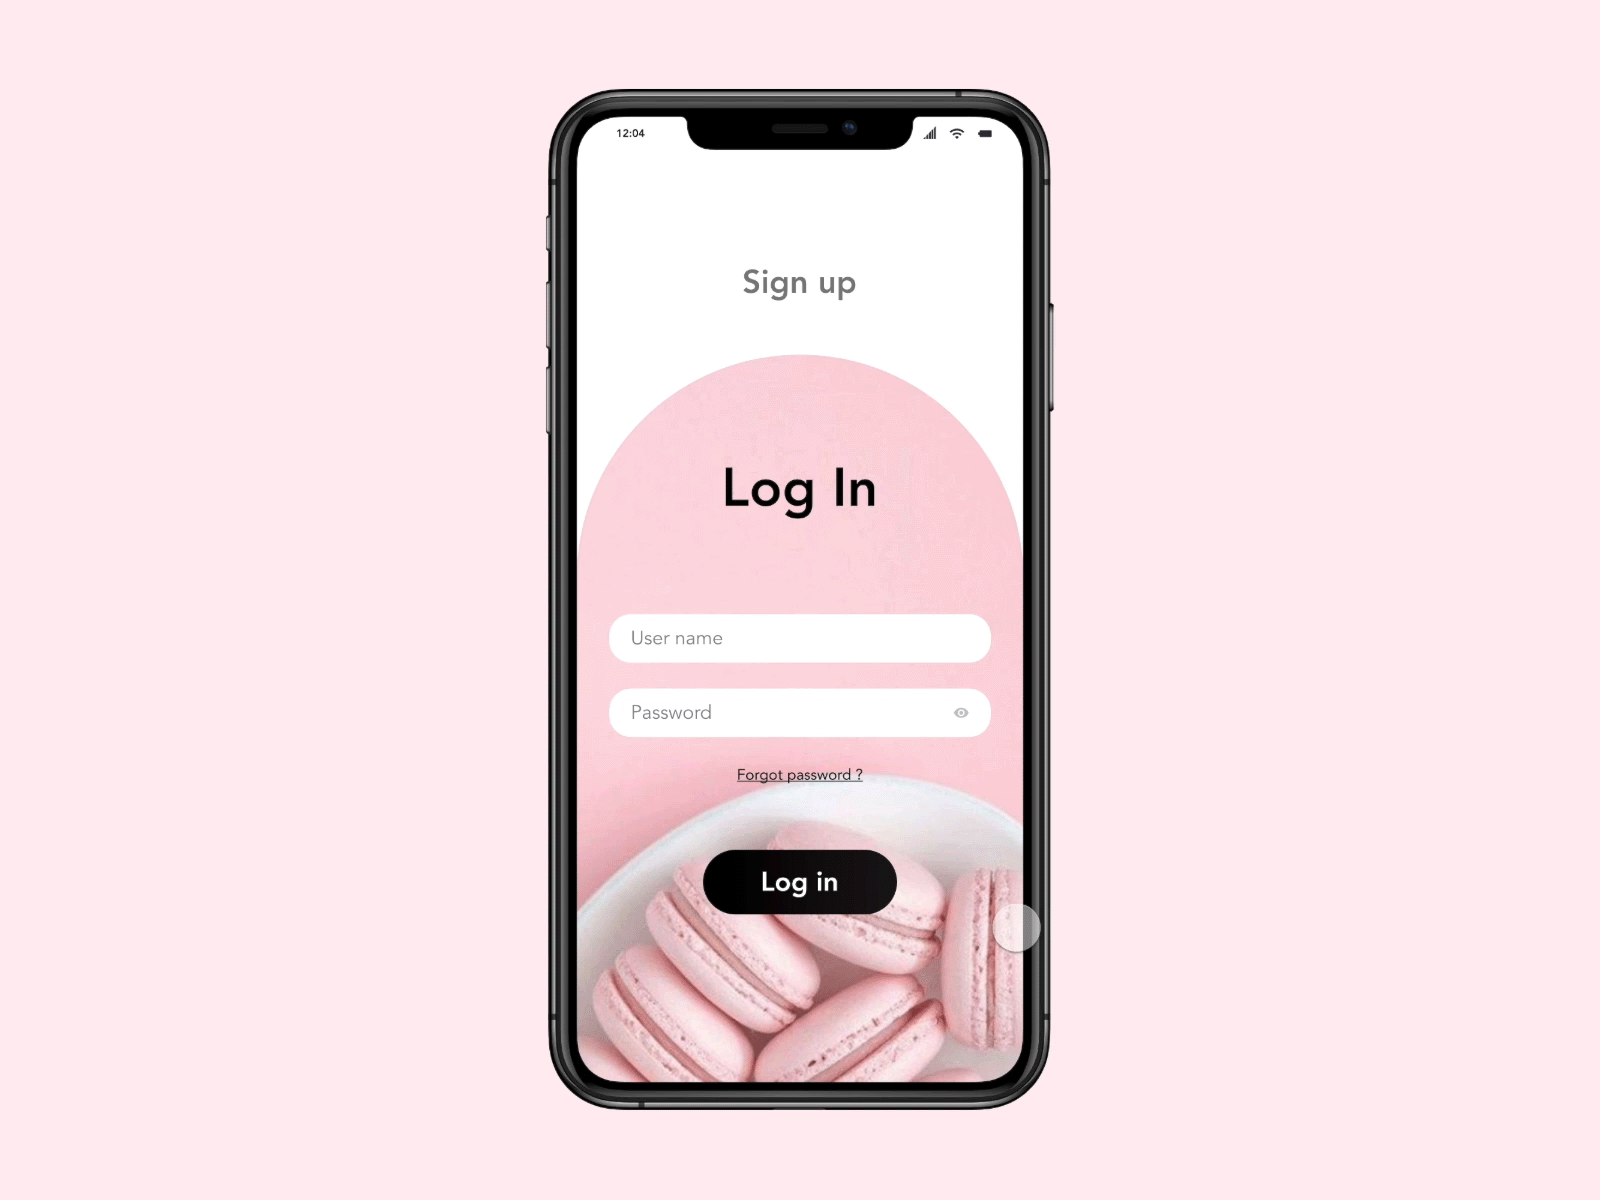 #DailyUi-001 - Signup Interaction design 2020 trend daily 100 challenge daily ui 001 dailychallenge design interactive design iphone 11 pro iphone ui mobile ui signup ui ui challenge uidesign